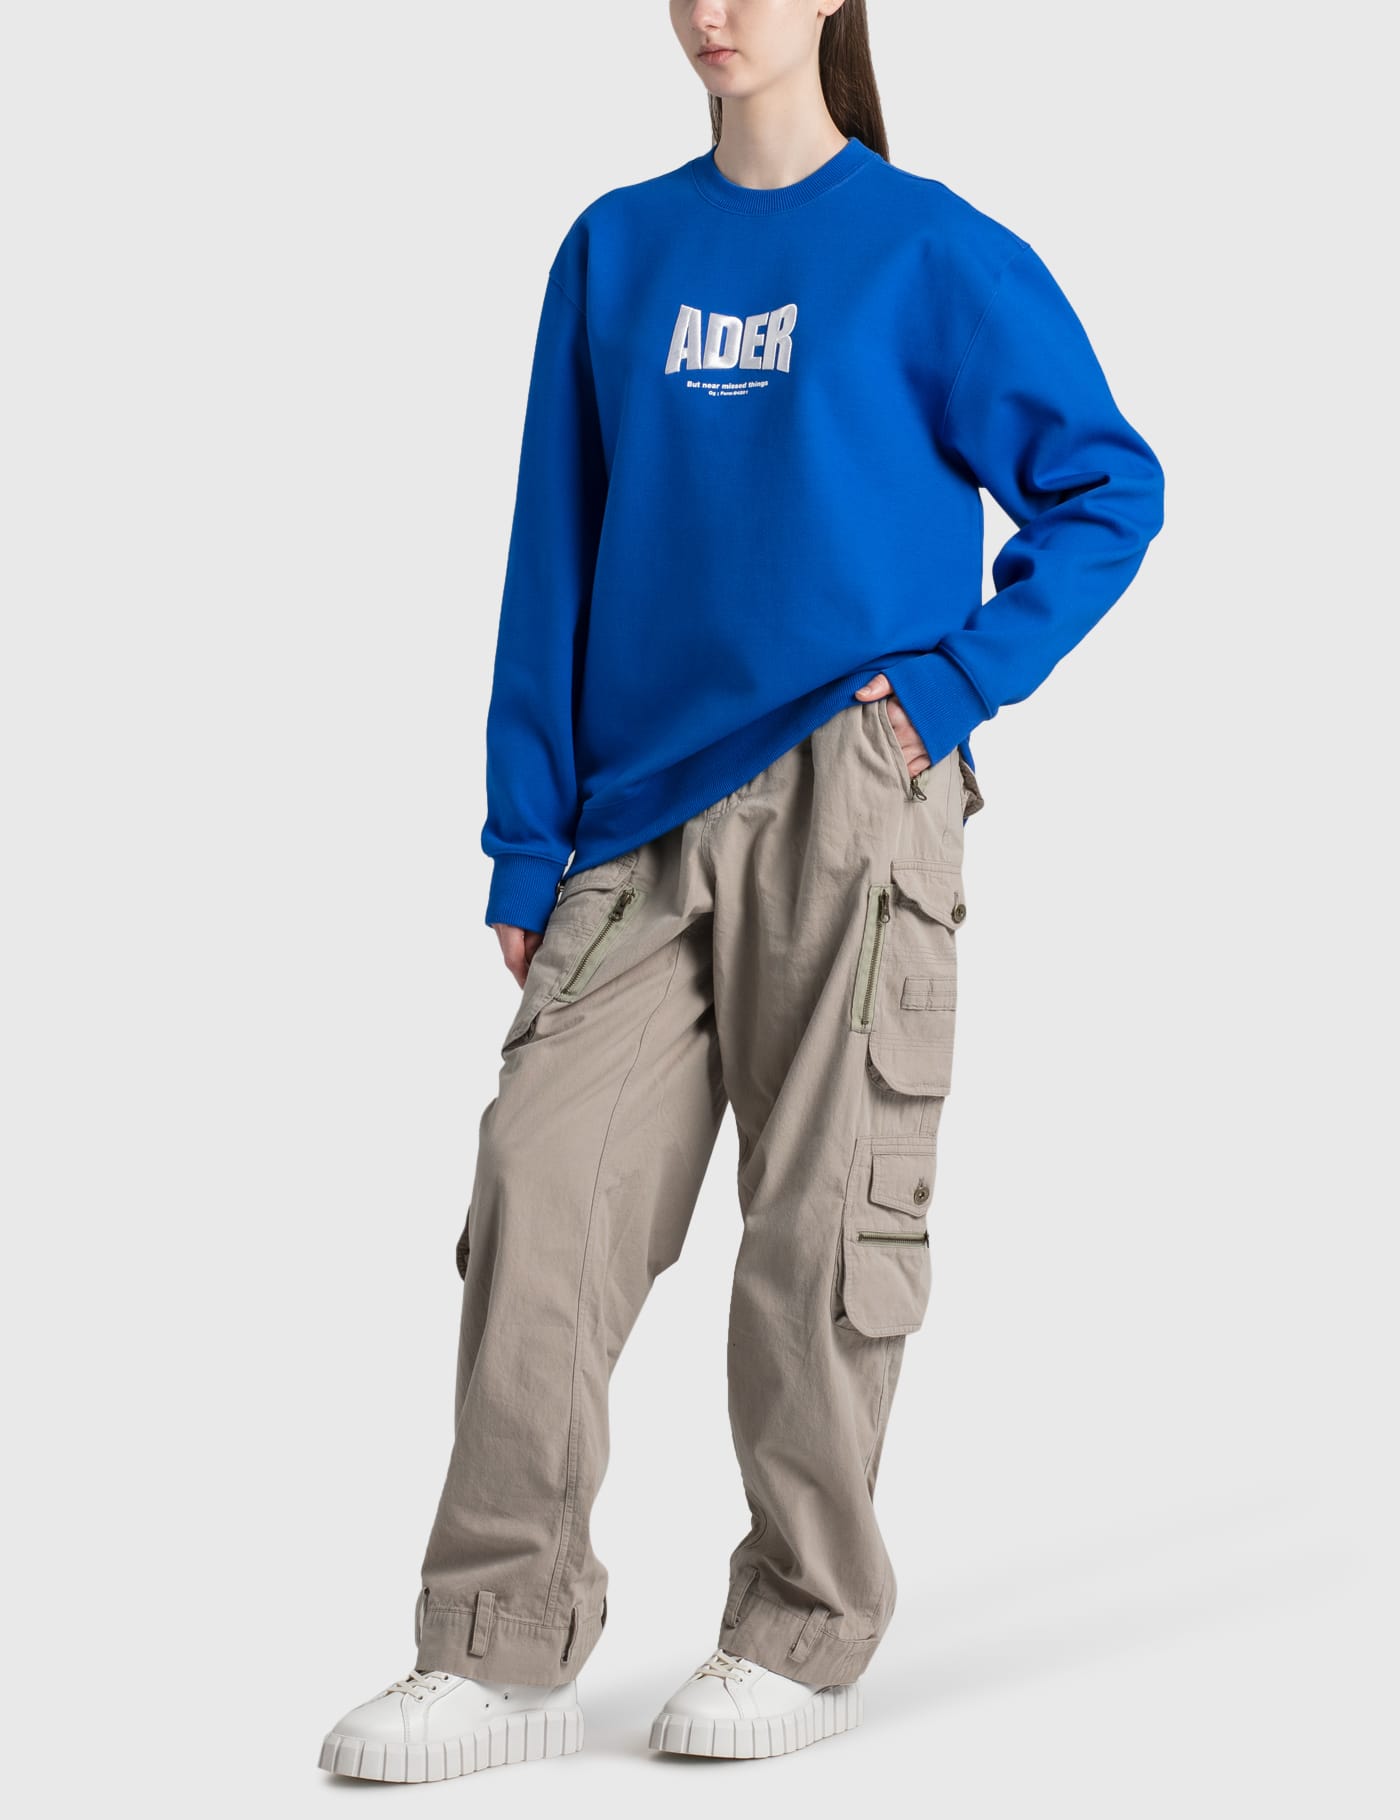 Ader Error - Ader Logo Sweatshirt | HBX - Globally Curated Fashion and  Lifestyle by Hypebeast